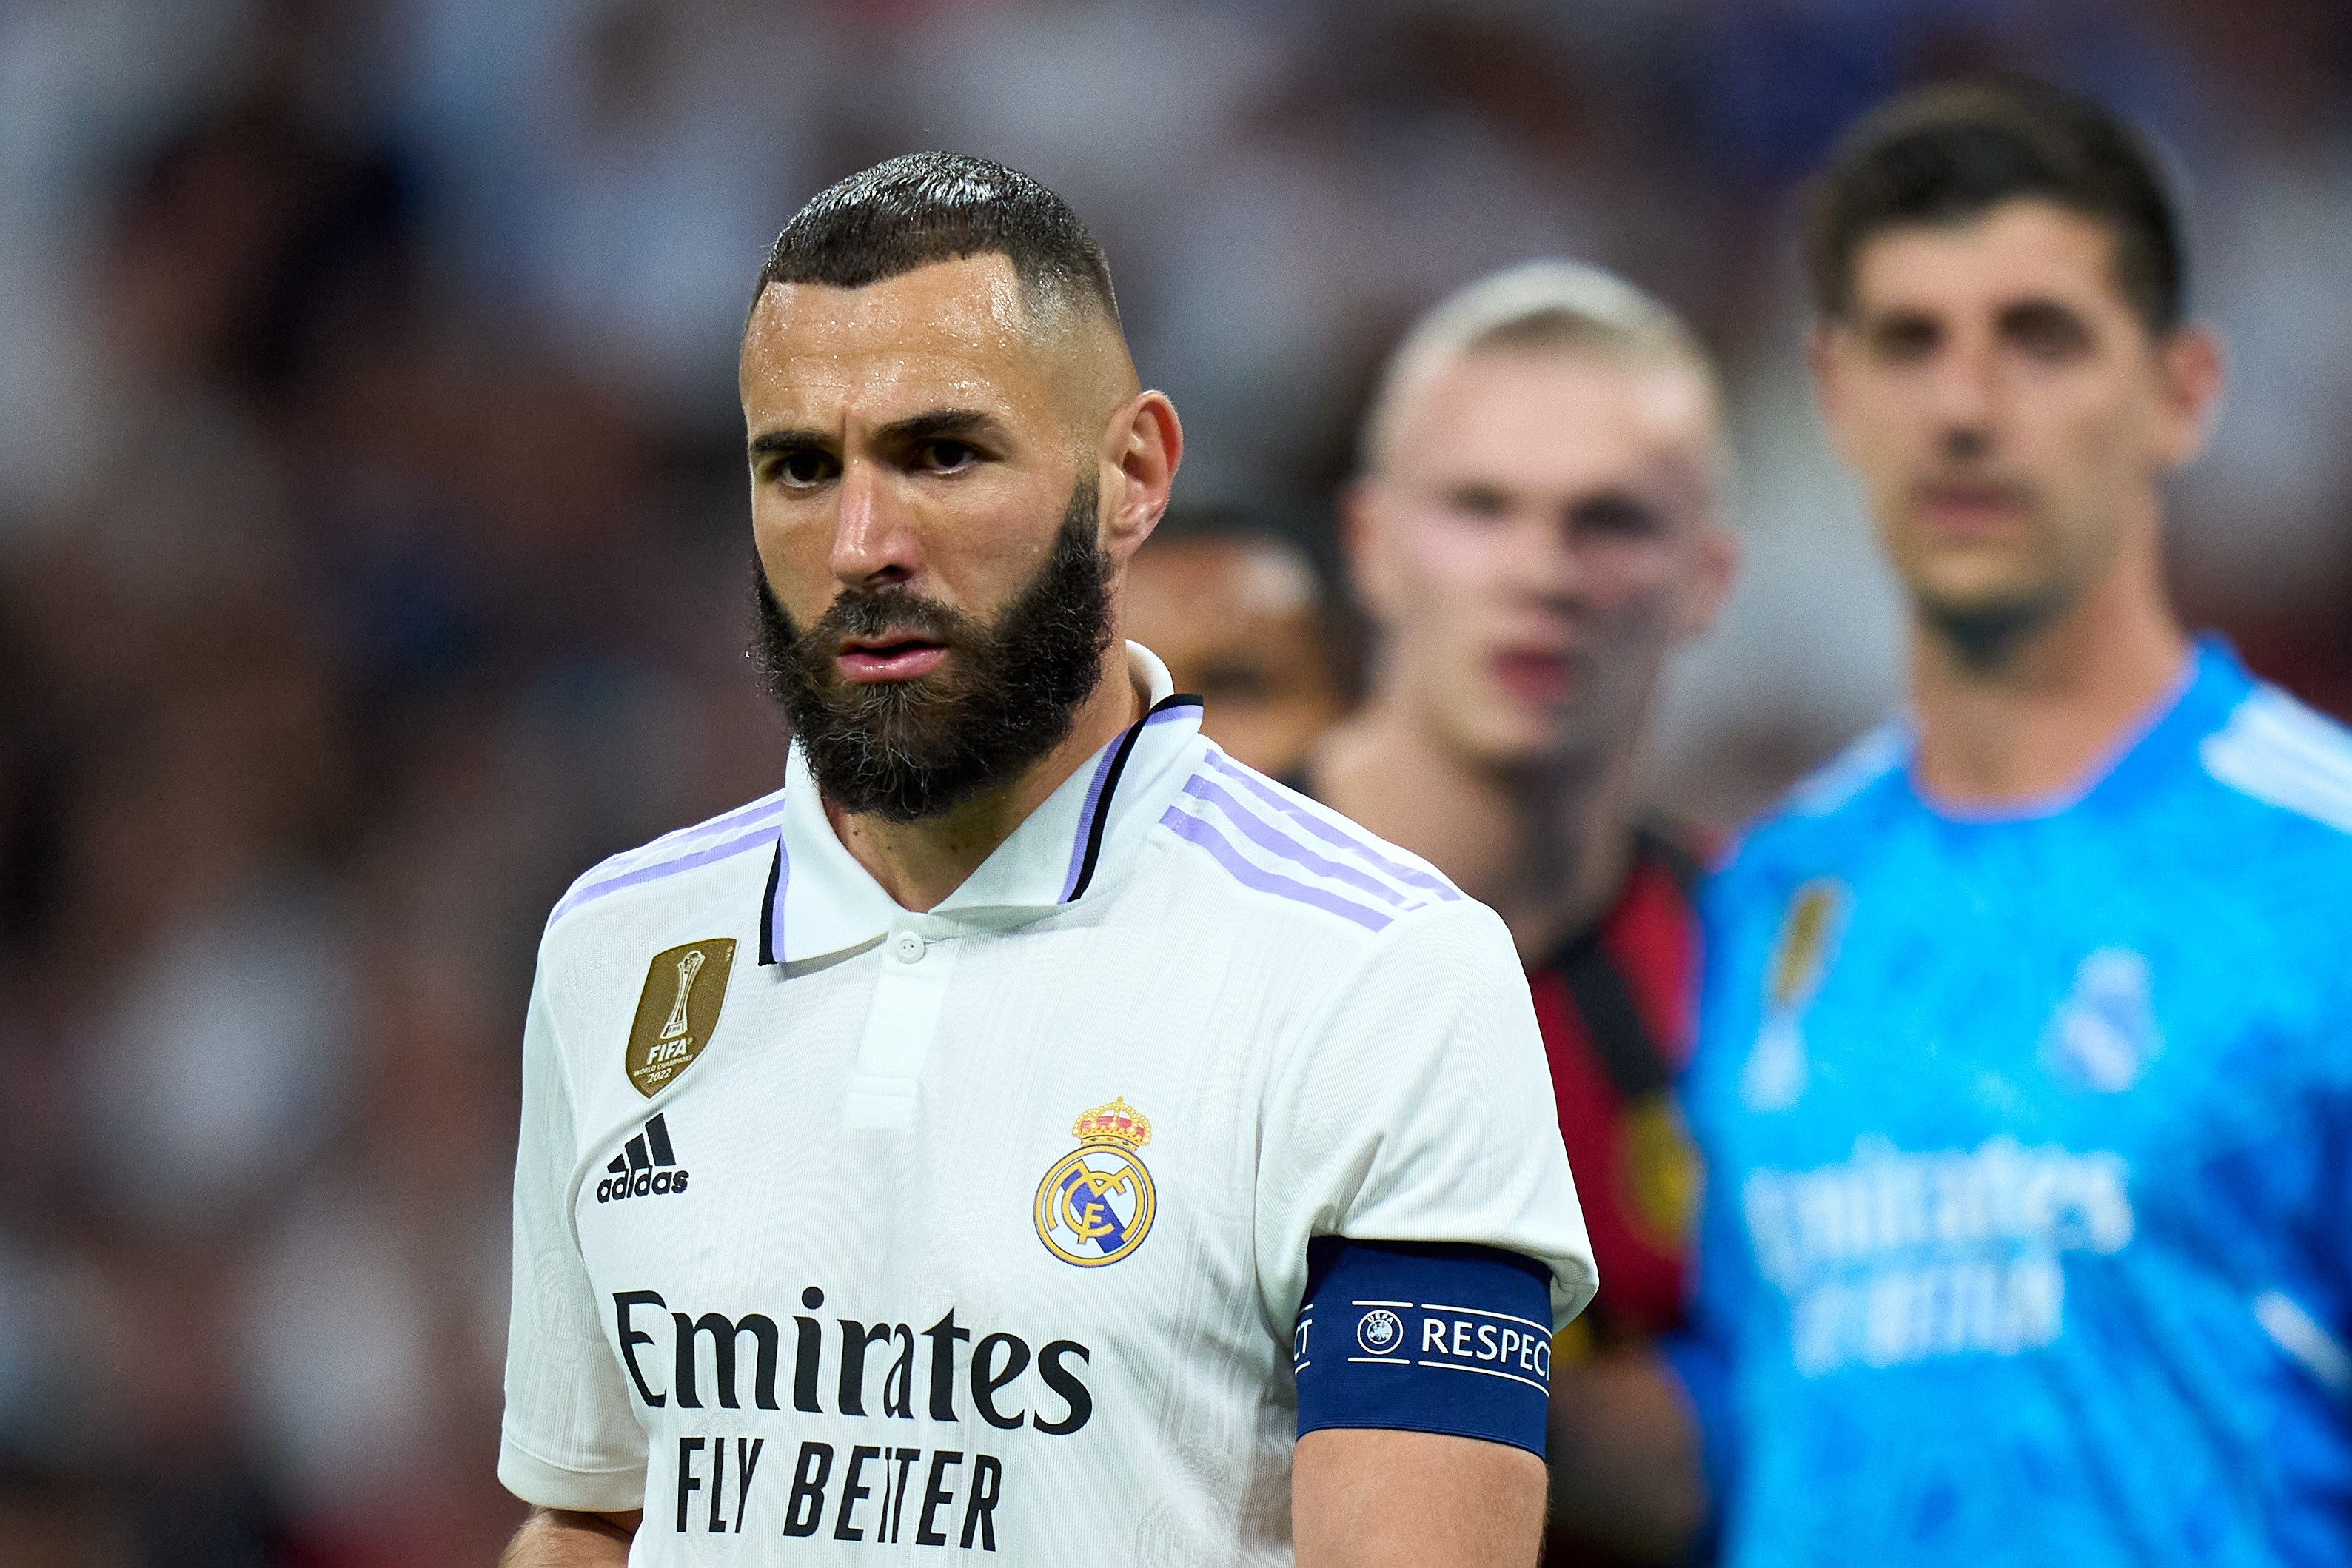 Karim Benzema weighing up €100m offer to leave Real Madrid for Saudi Arabia | The Independent